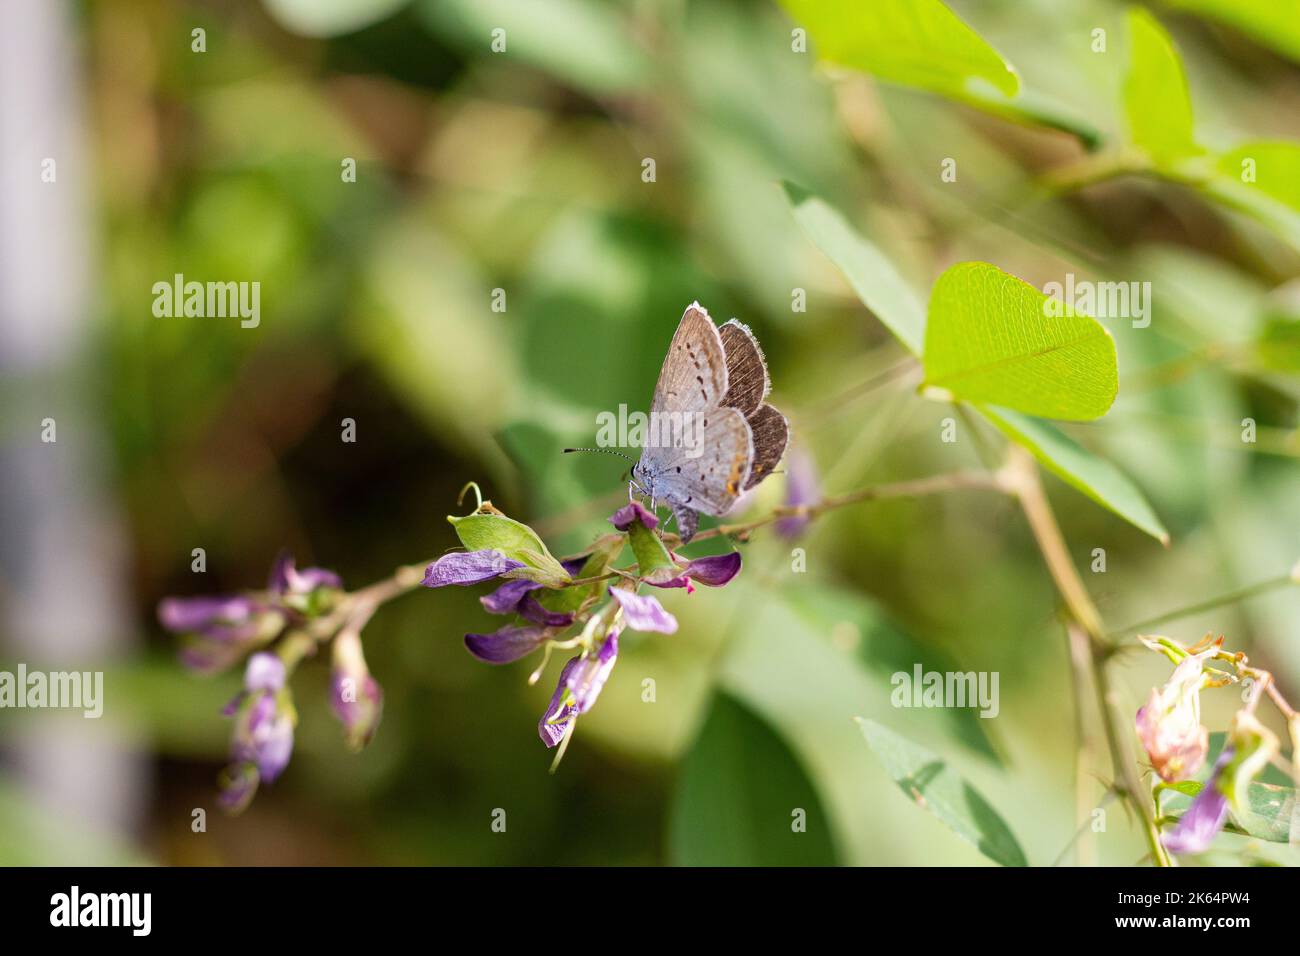 A close up of a short-tailed blue butterfly sitting on a purple flower Stock Photo